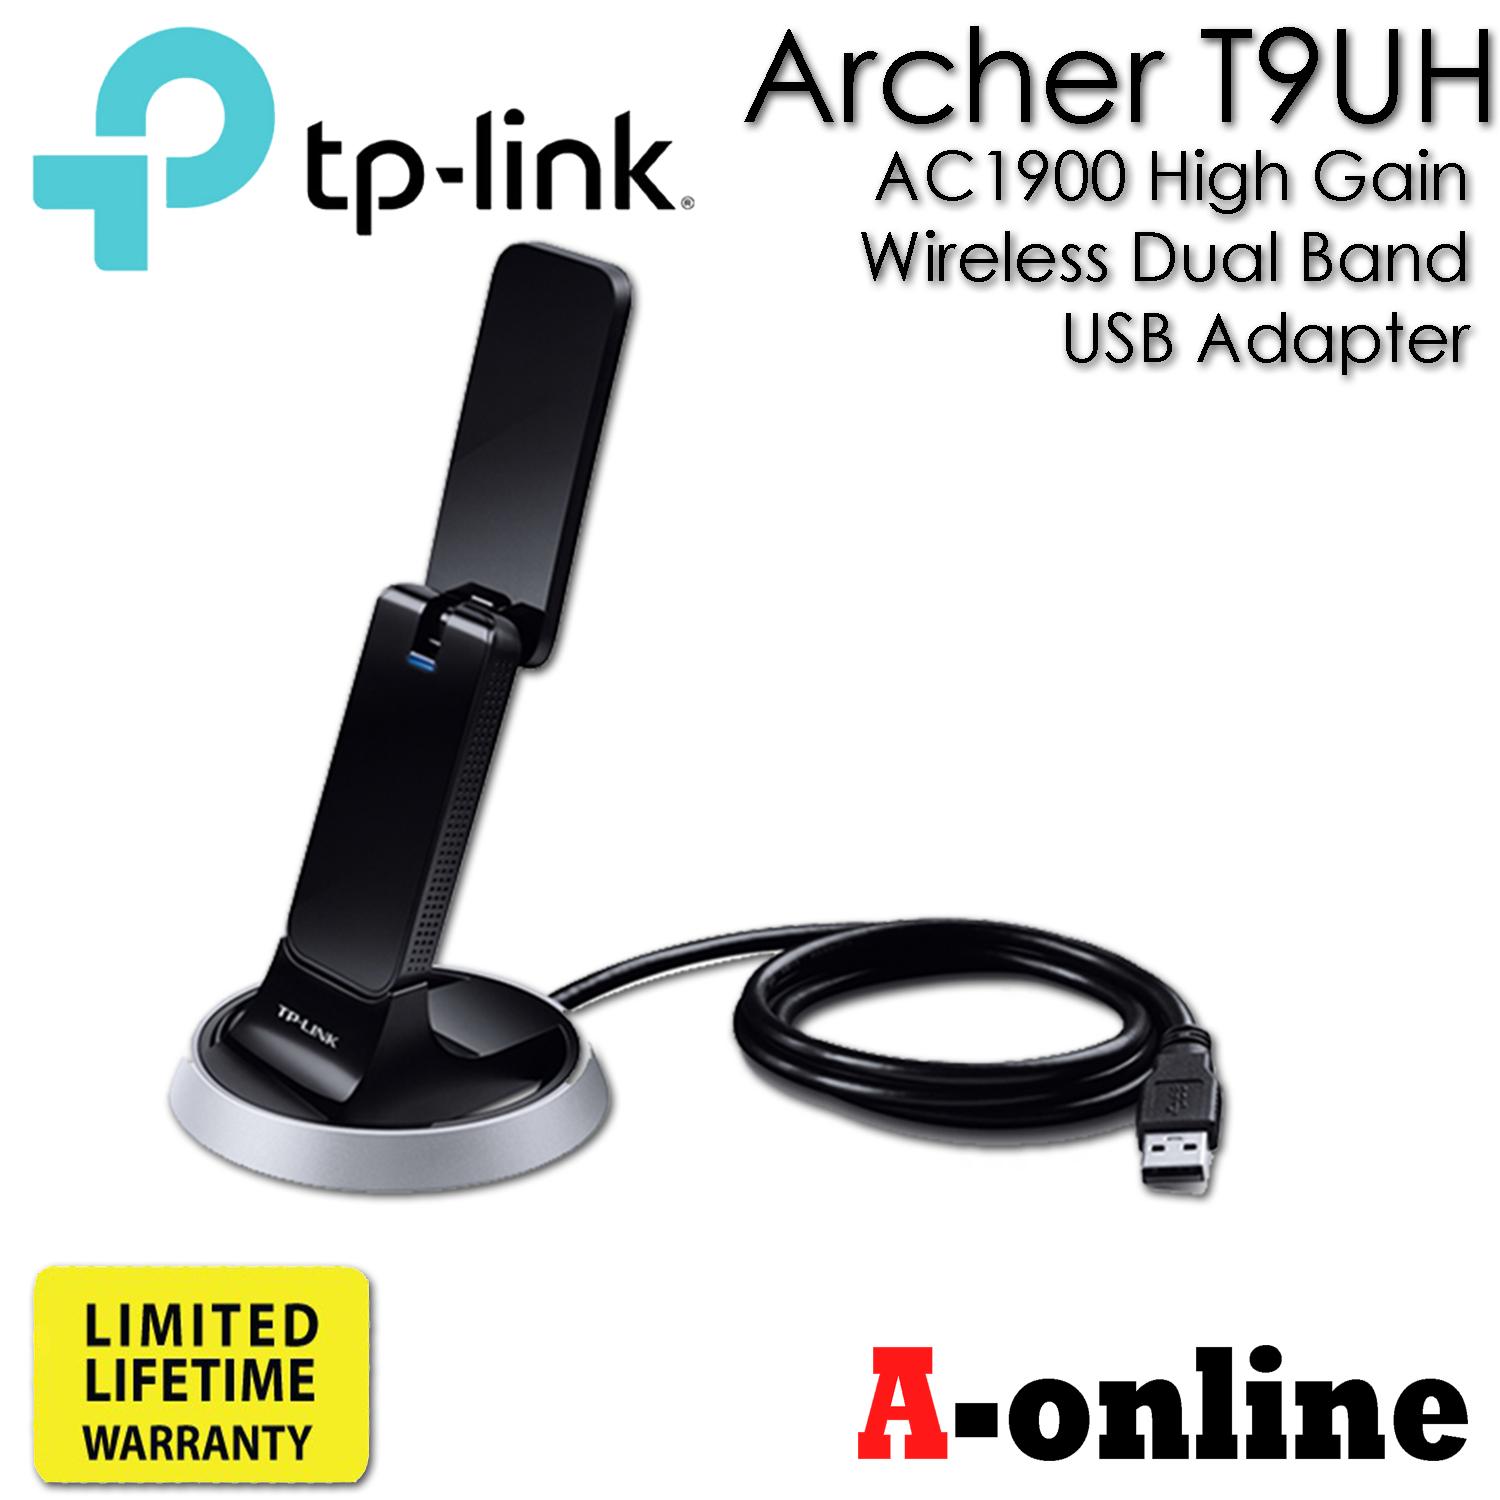 TP-Link Archer T9UH AC1900 High Gain Wireless Dual Band USB Adapter/aonline